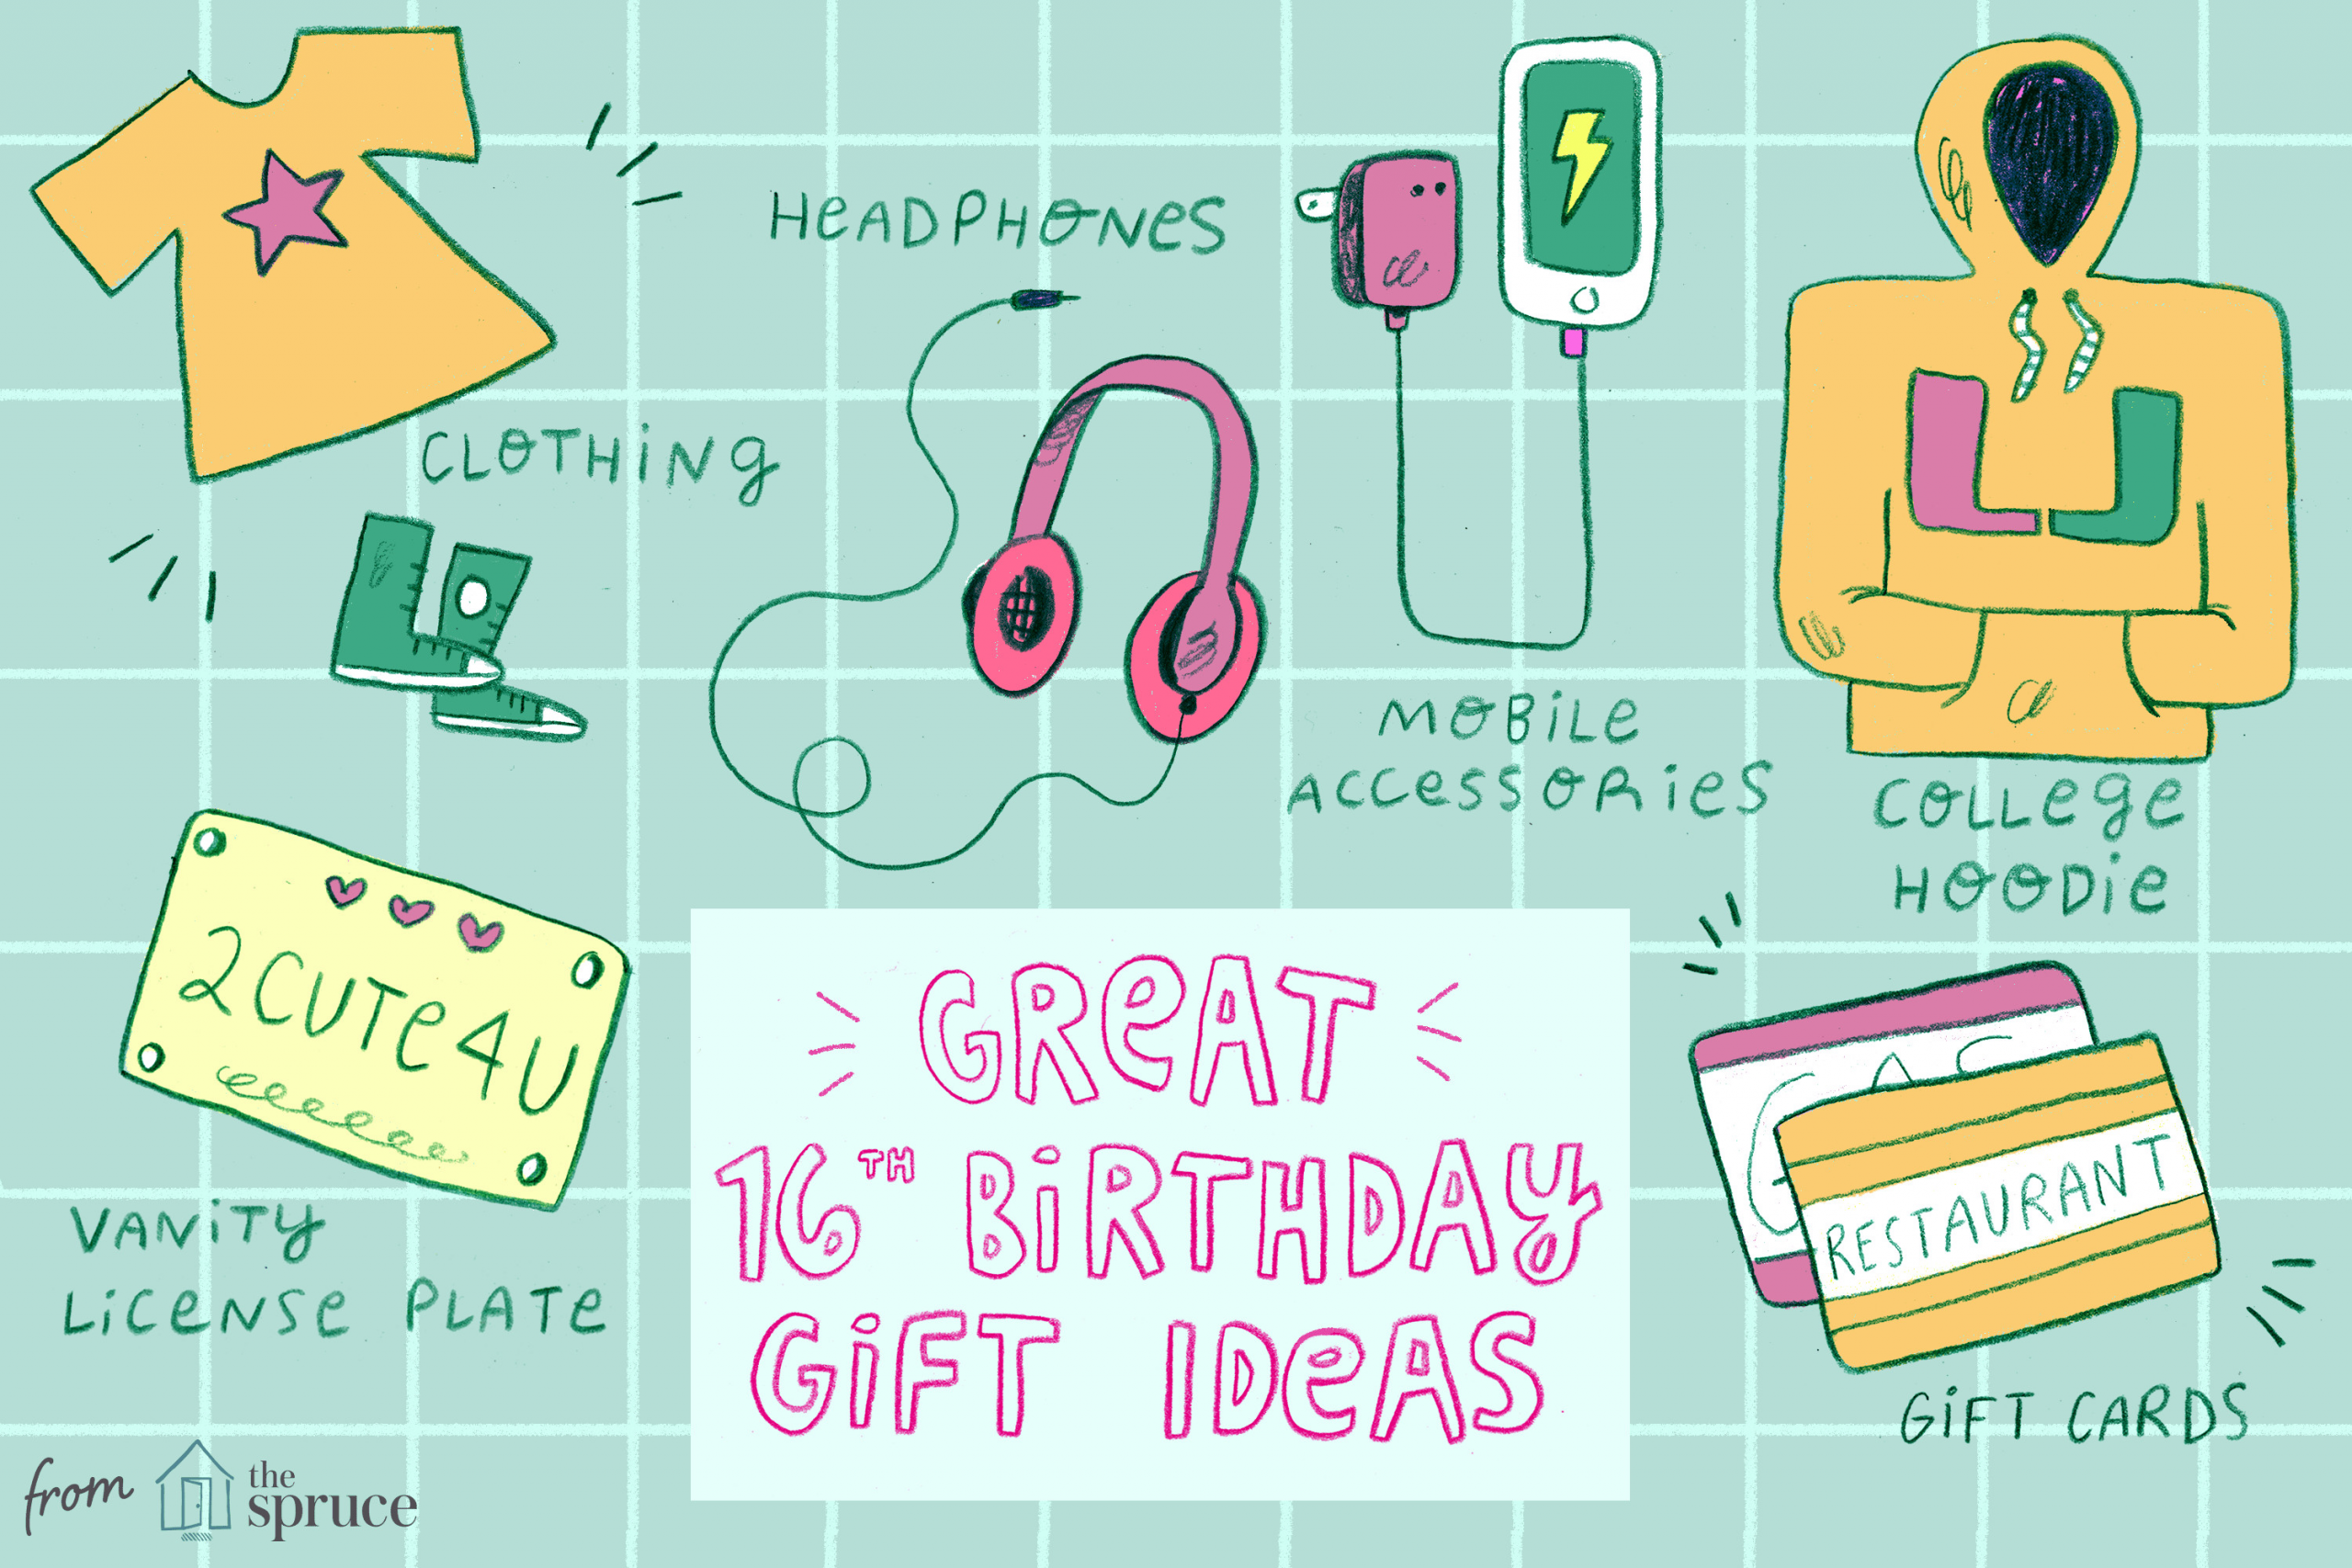 Fun Things To Do For A Birthday Party
 20 Awesome Ideas for 16th Birthday Gifts